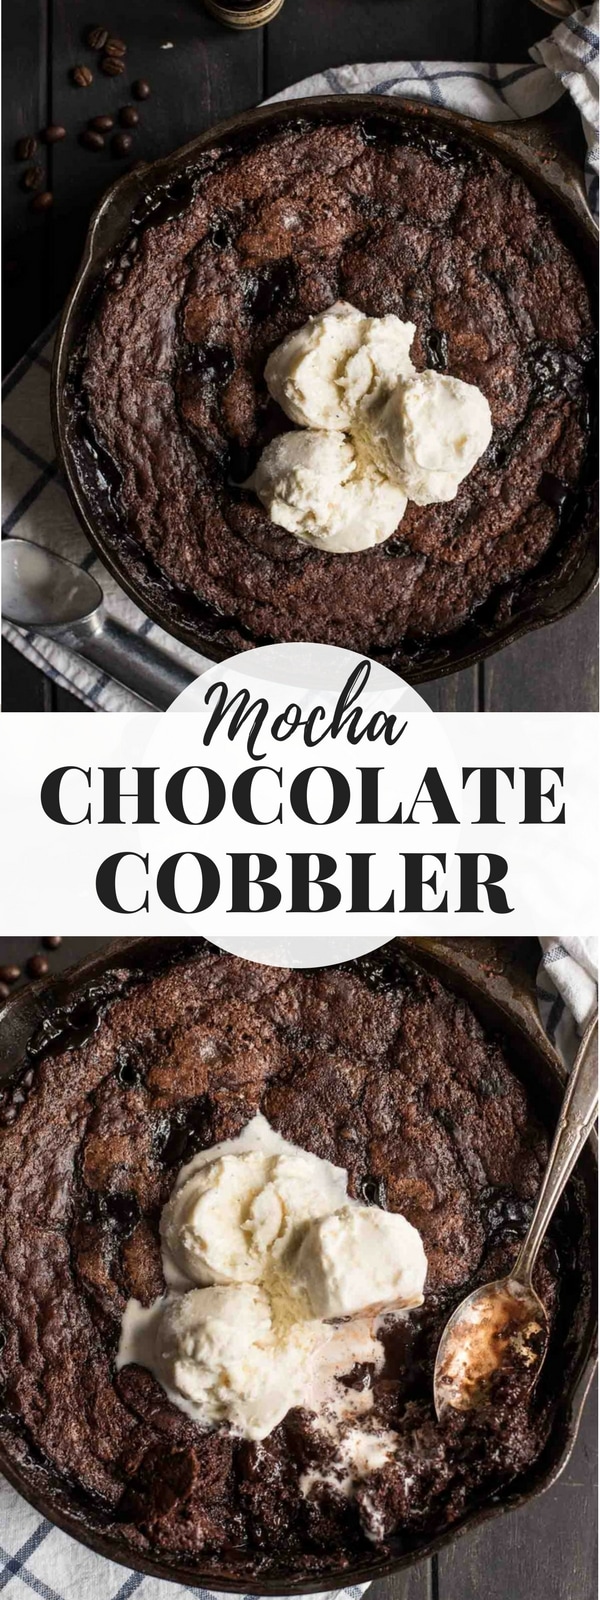 Mocha Chocolate Cobbler in a cast iron skillet with scoops of ice cream